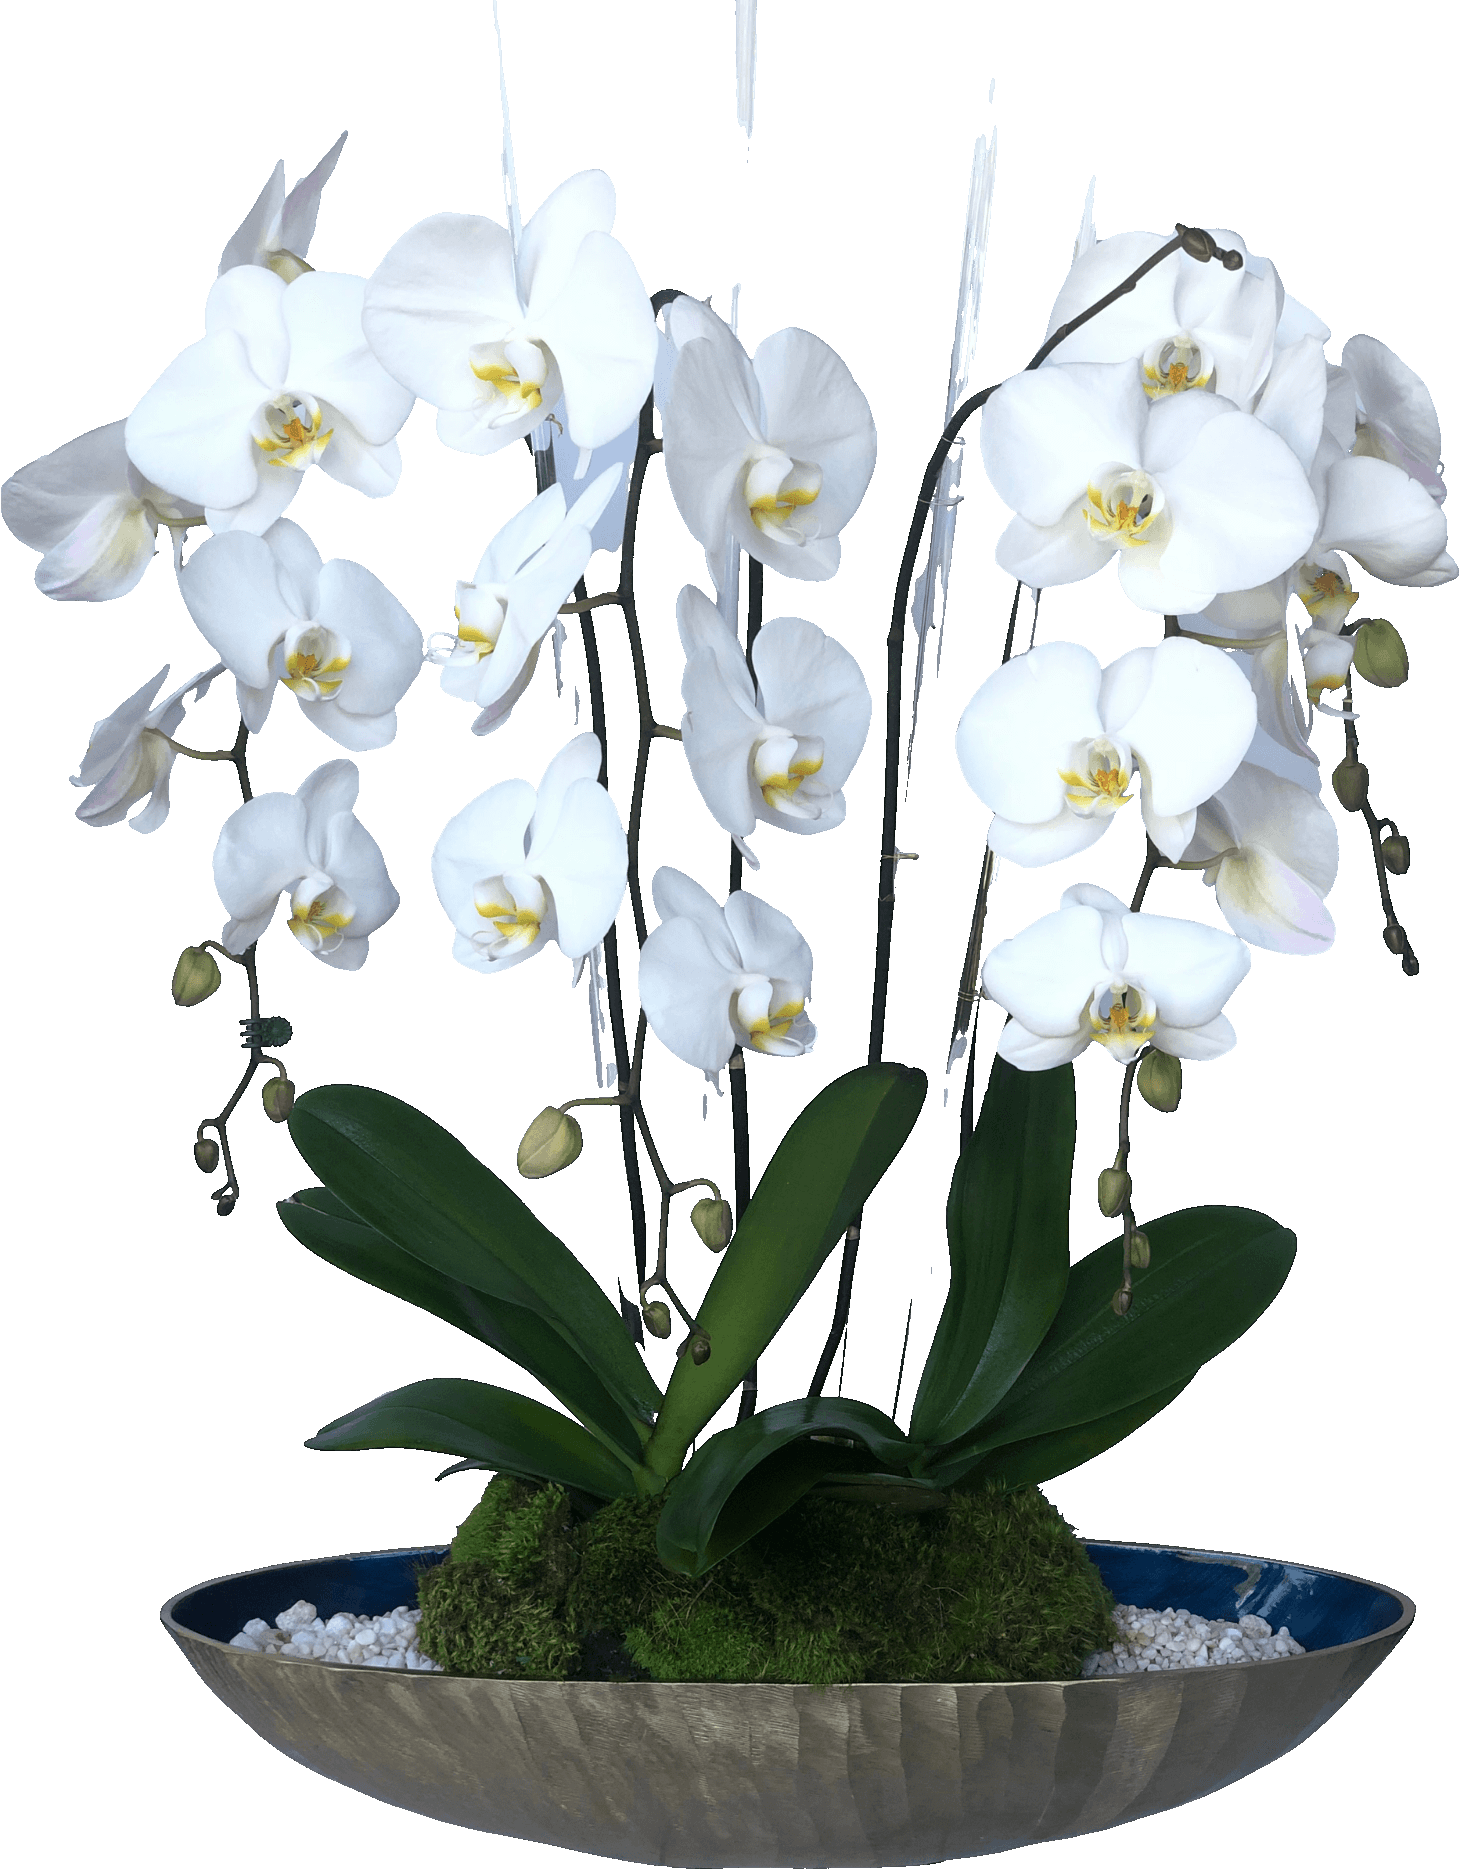 Fresh white phalaenopsis orchids with glass sticks.